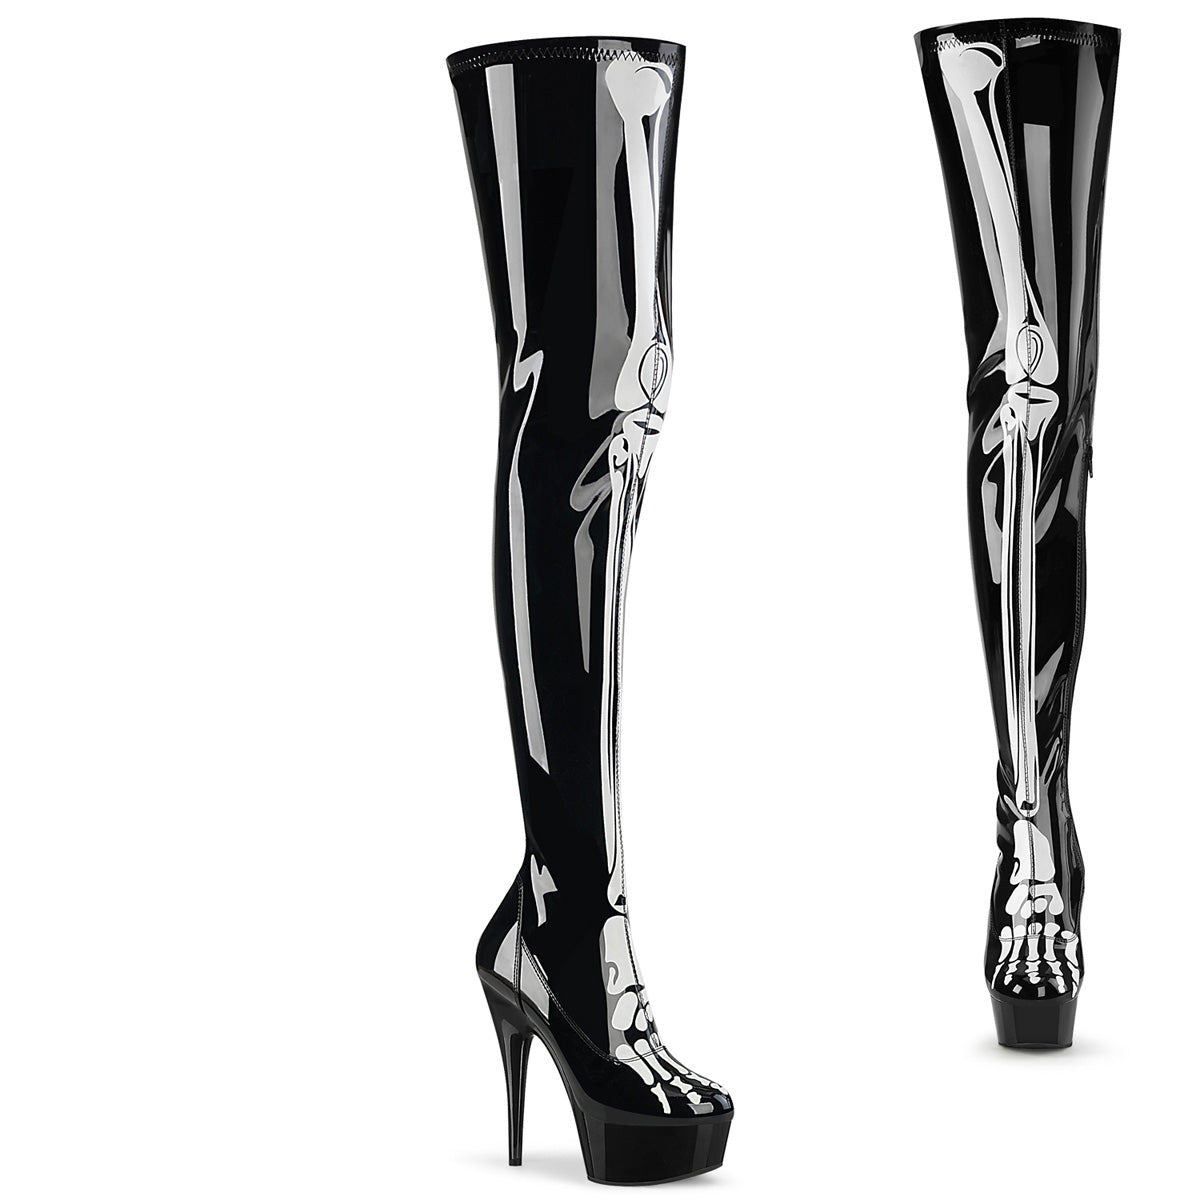 DELIGHT-3000BONE Pleasers Platform Shoes (Exotic Dancing Heels) Thigh High Boots Pleasers